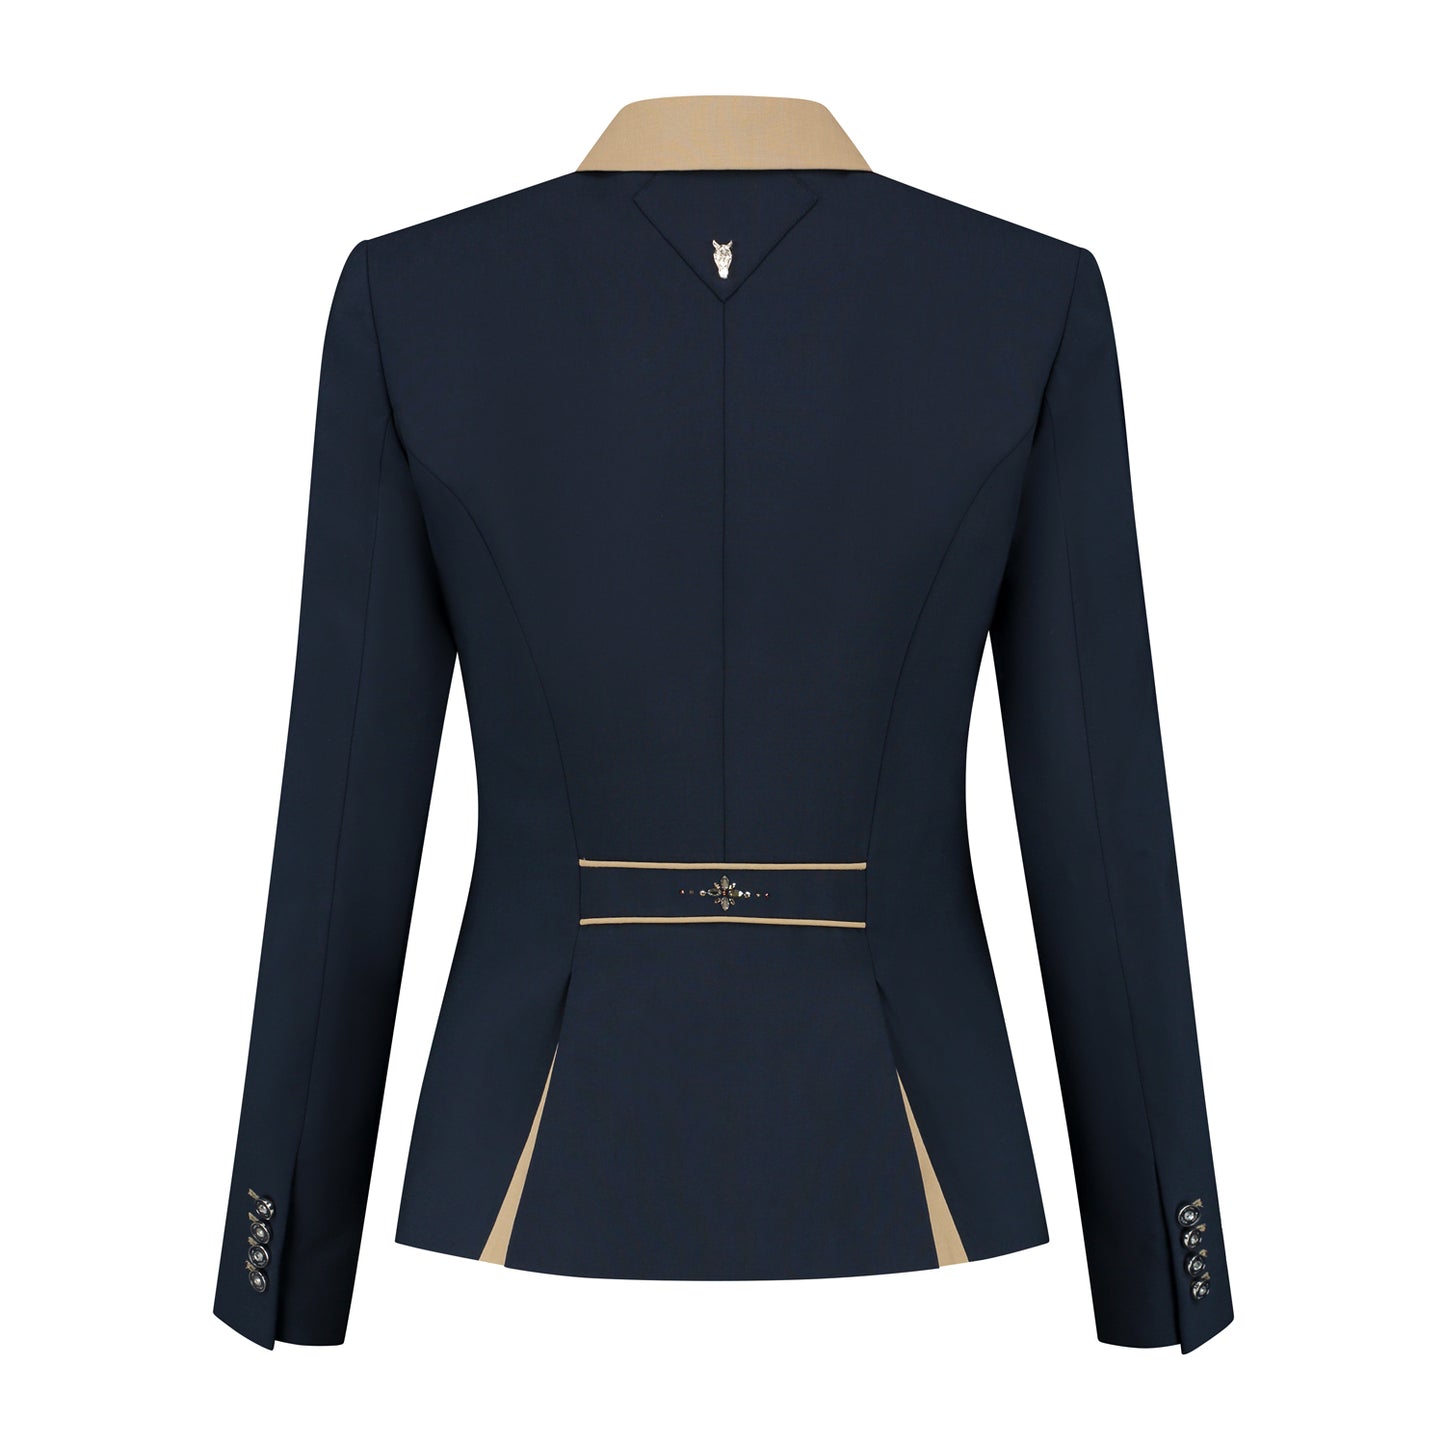 Navy competition jacket - Almond